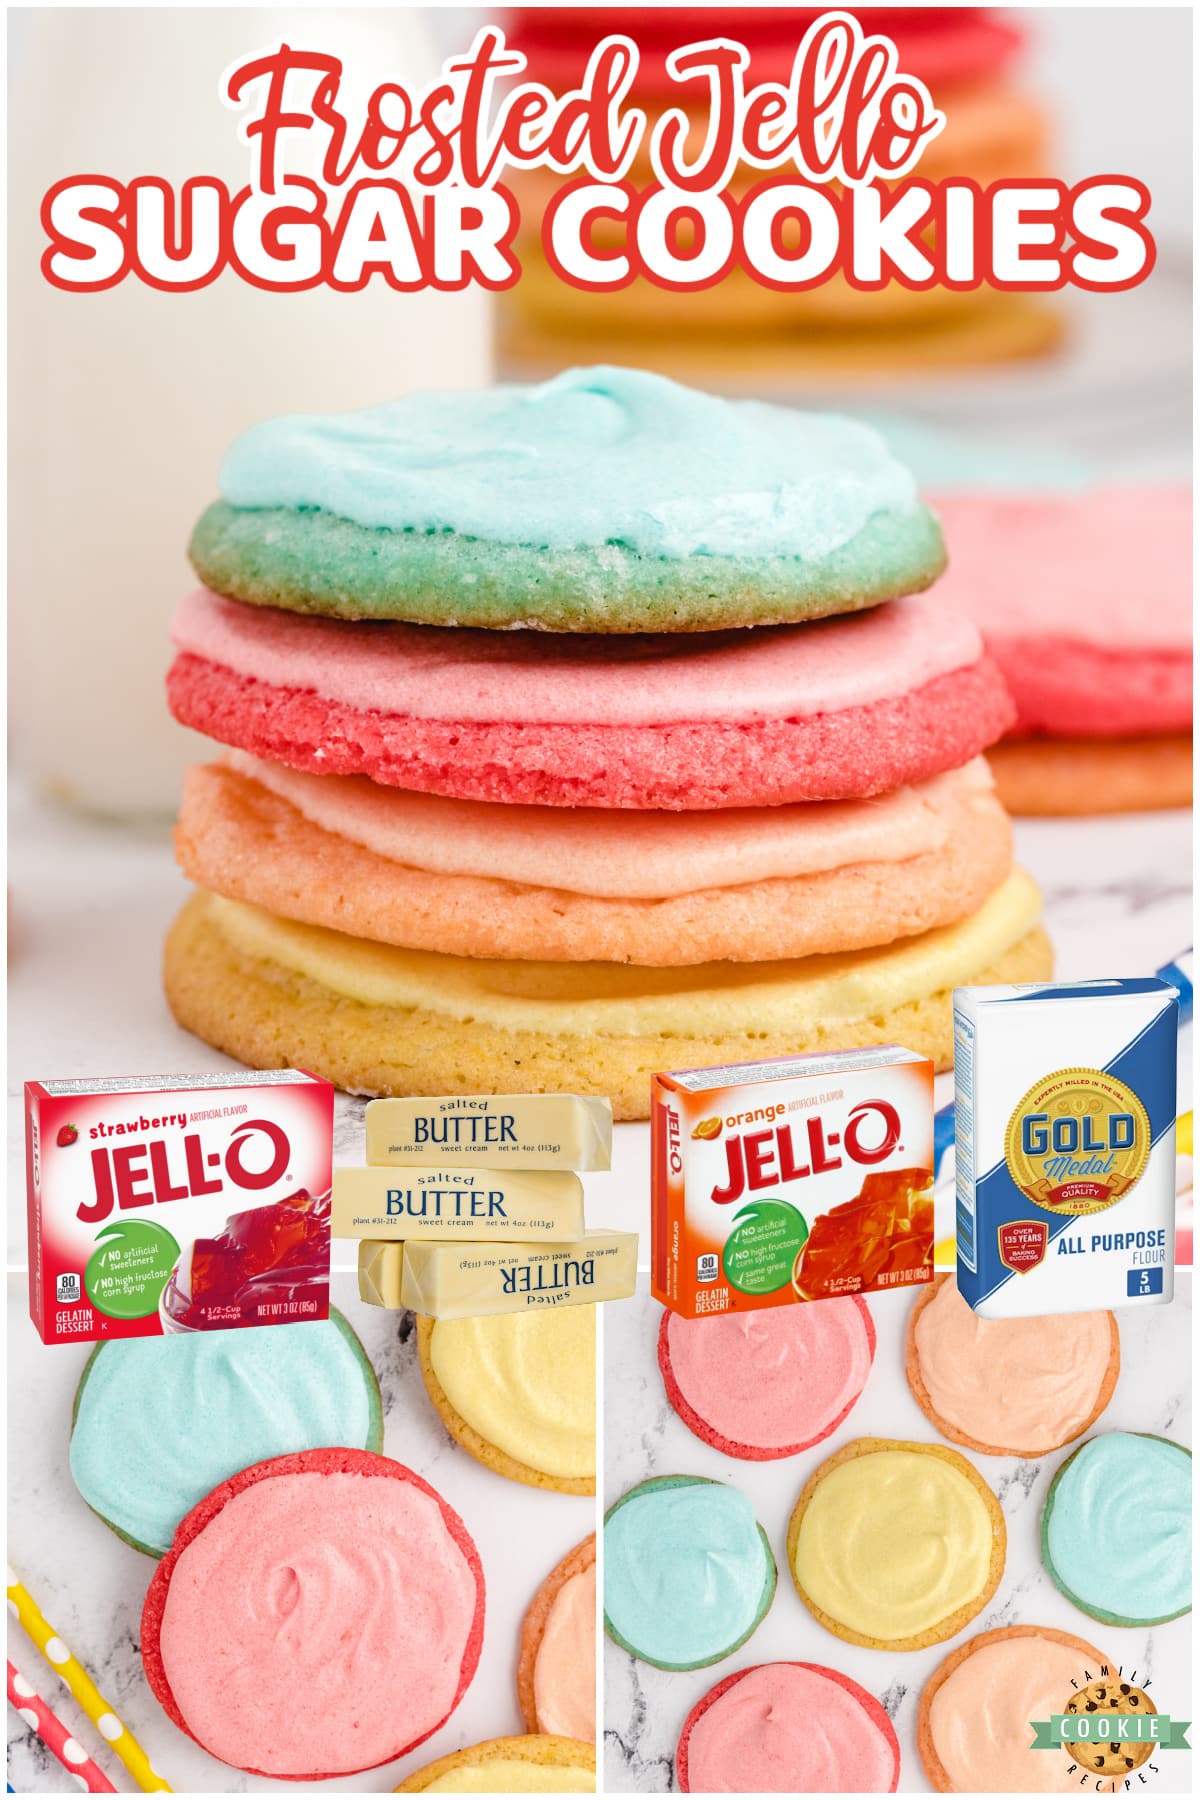 Jello Sugar Cookies are made with Jello in the cookies and the frosting! Soft sugar cookie recipe that can be made with any flavor and the simple buttercream frosting can be flavored to match. 